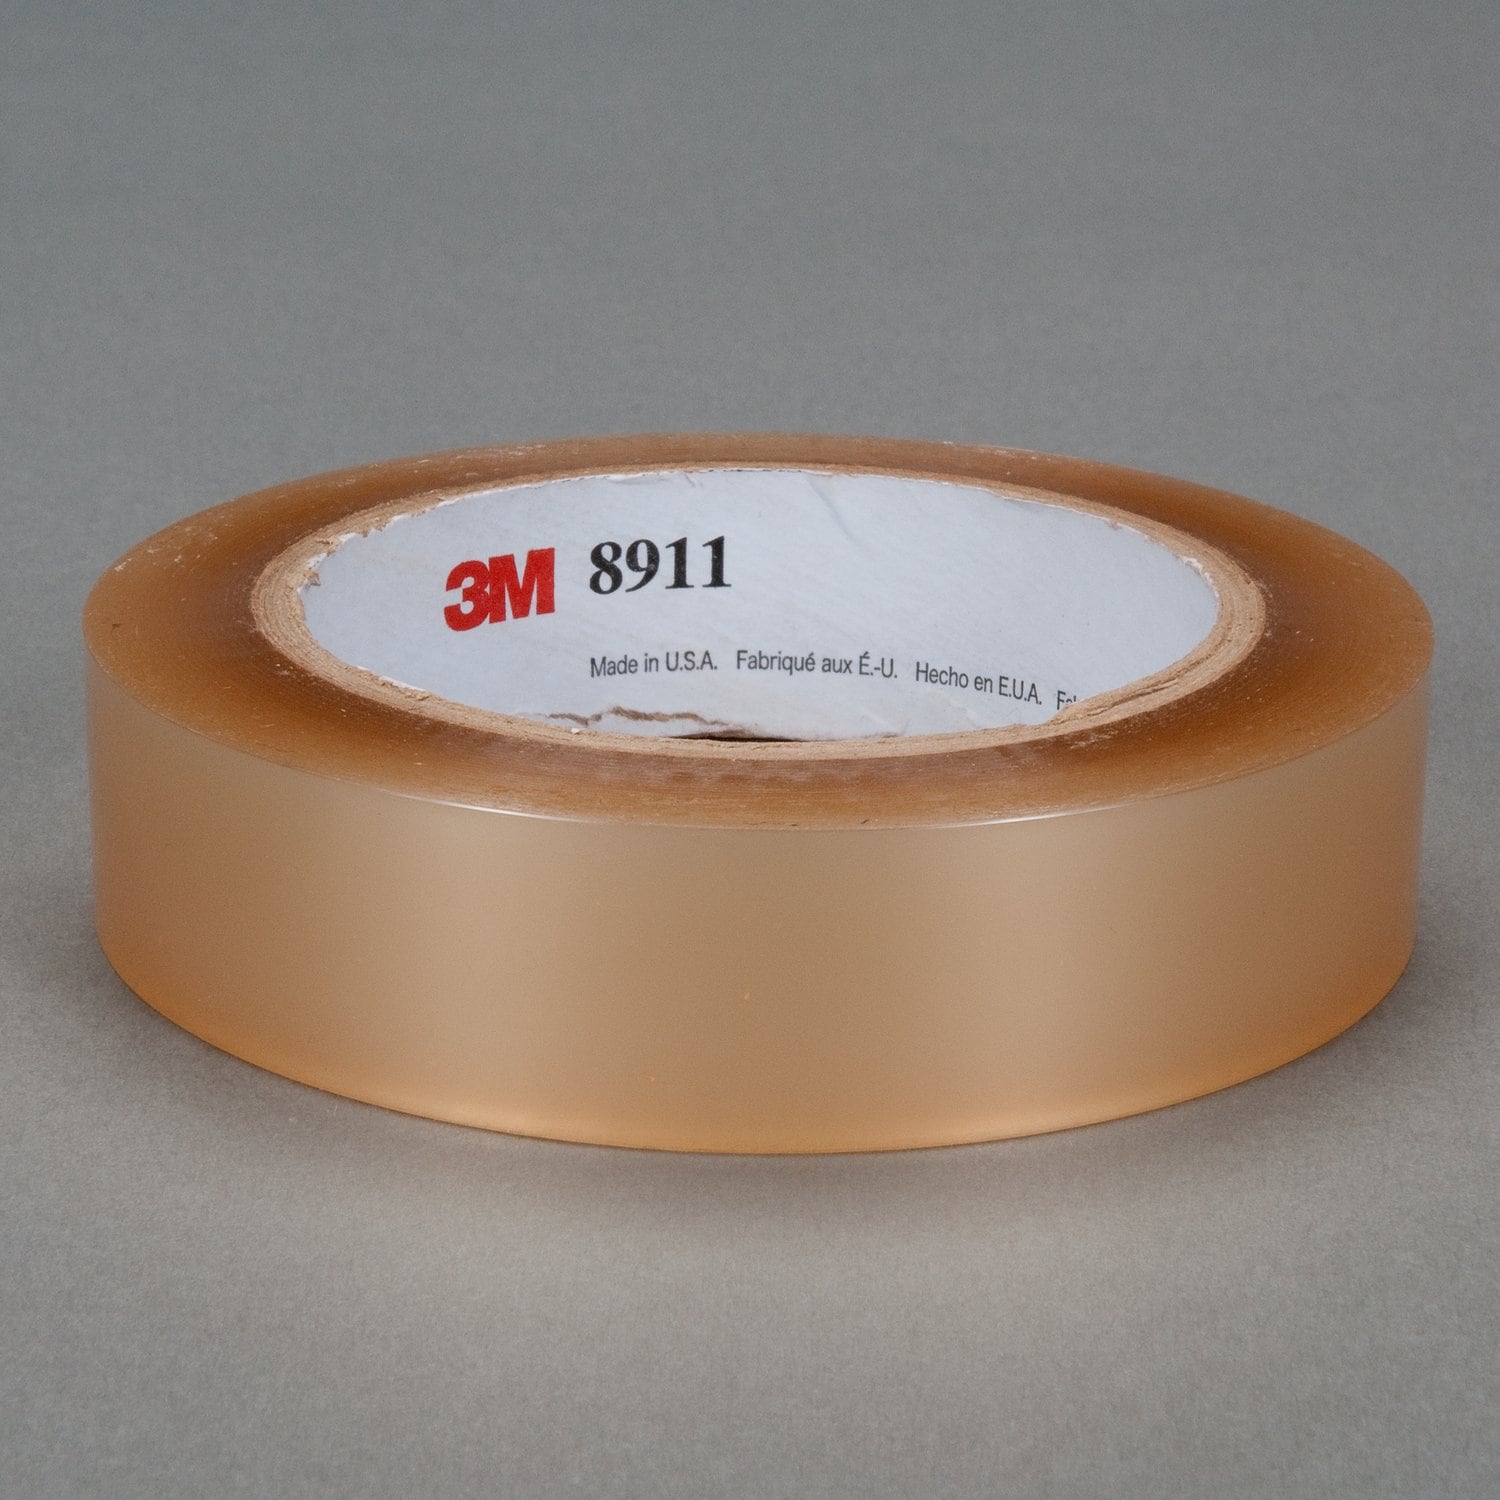 7000049592 - 3M Polyester Tape 8911, Transparent, 1 in x 72 yd, 2.3 mil, 36 rolls
per case